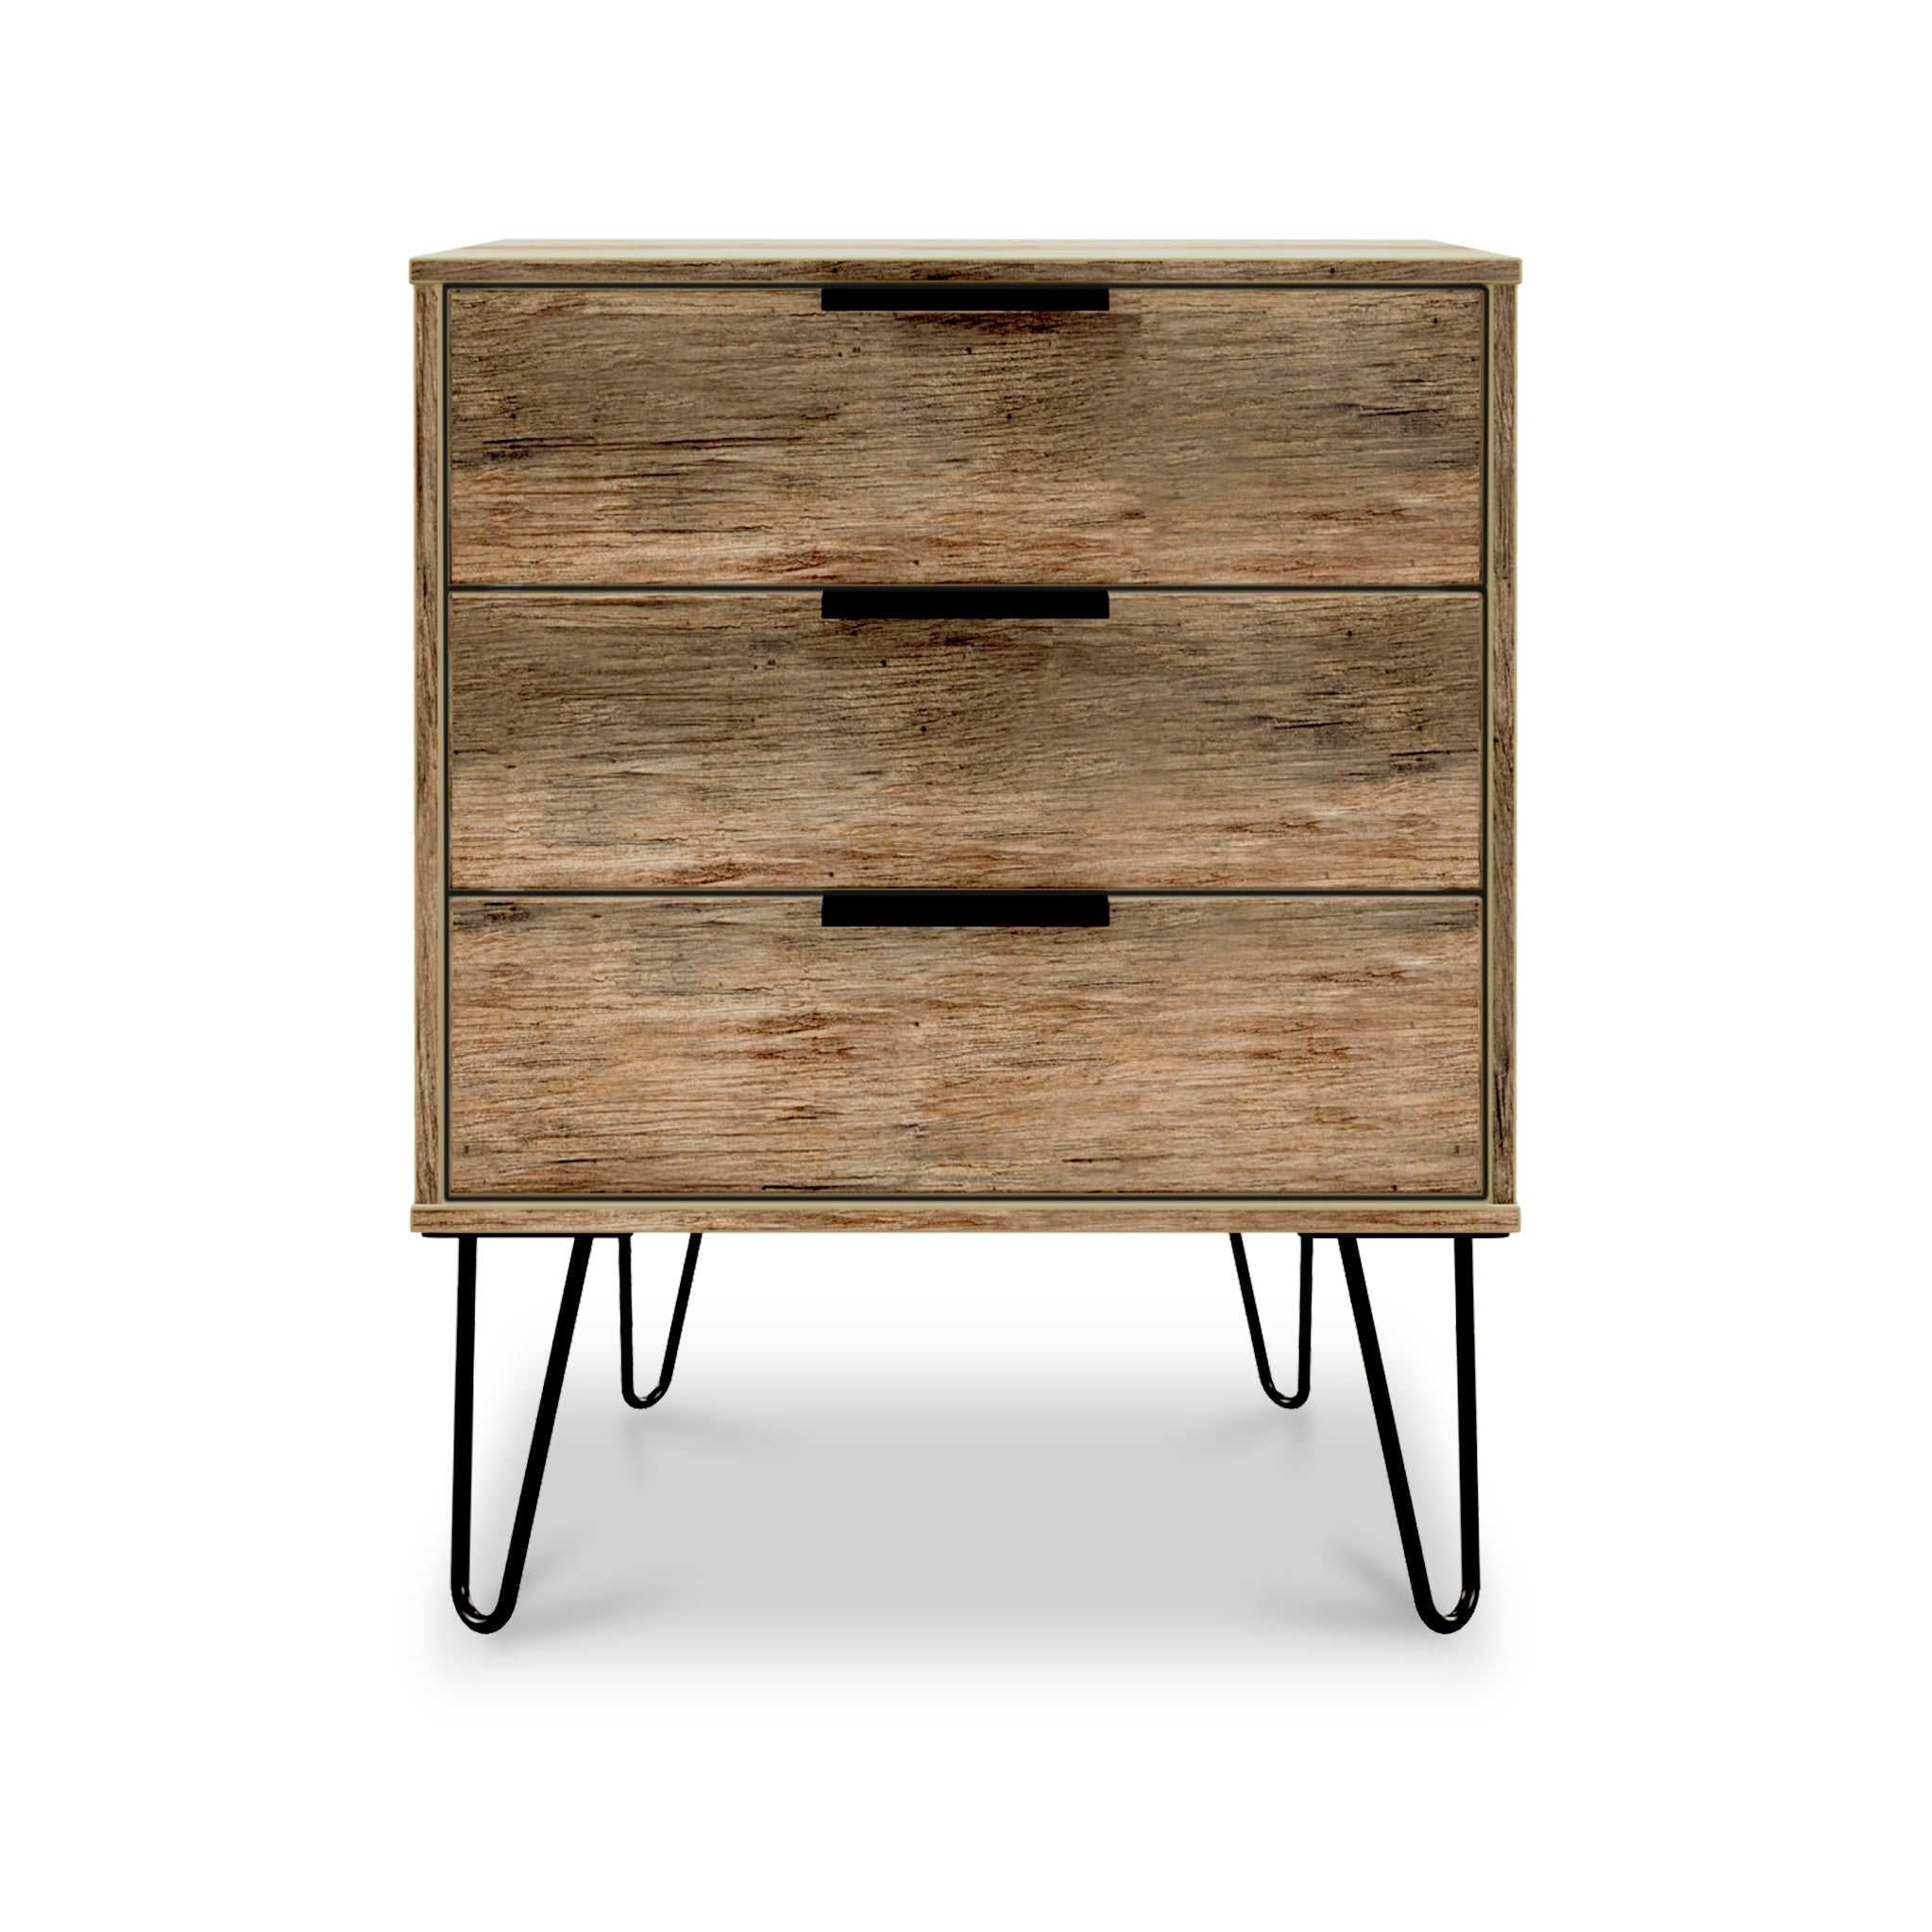 Moreno Rustic Oak Wooden 3 Drawer Midi Chest Of Drawers With Hairpin Legs